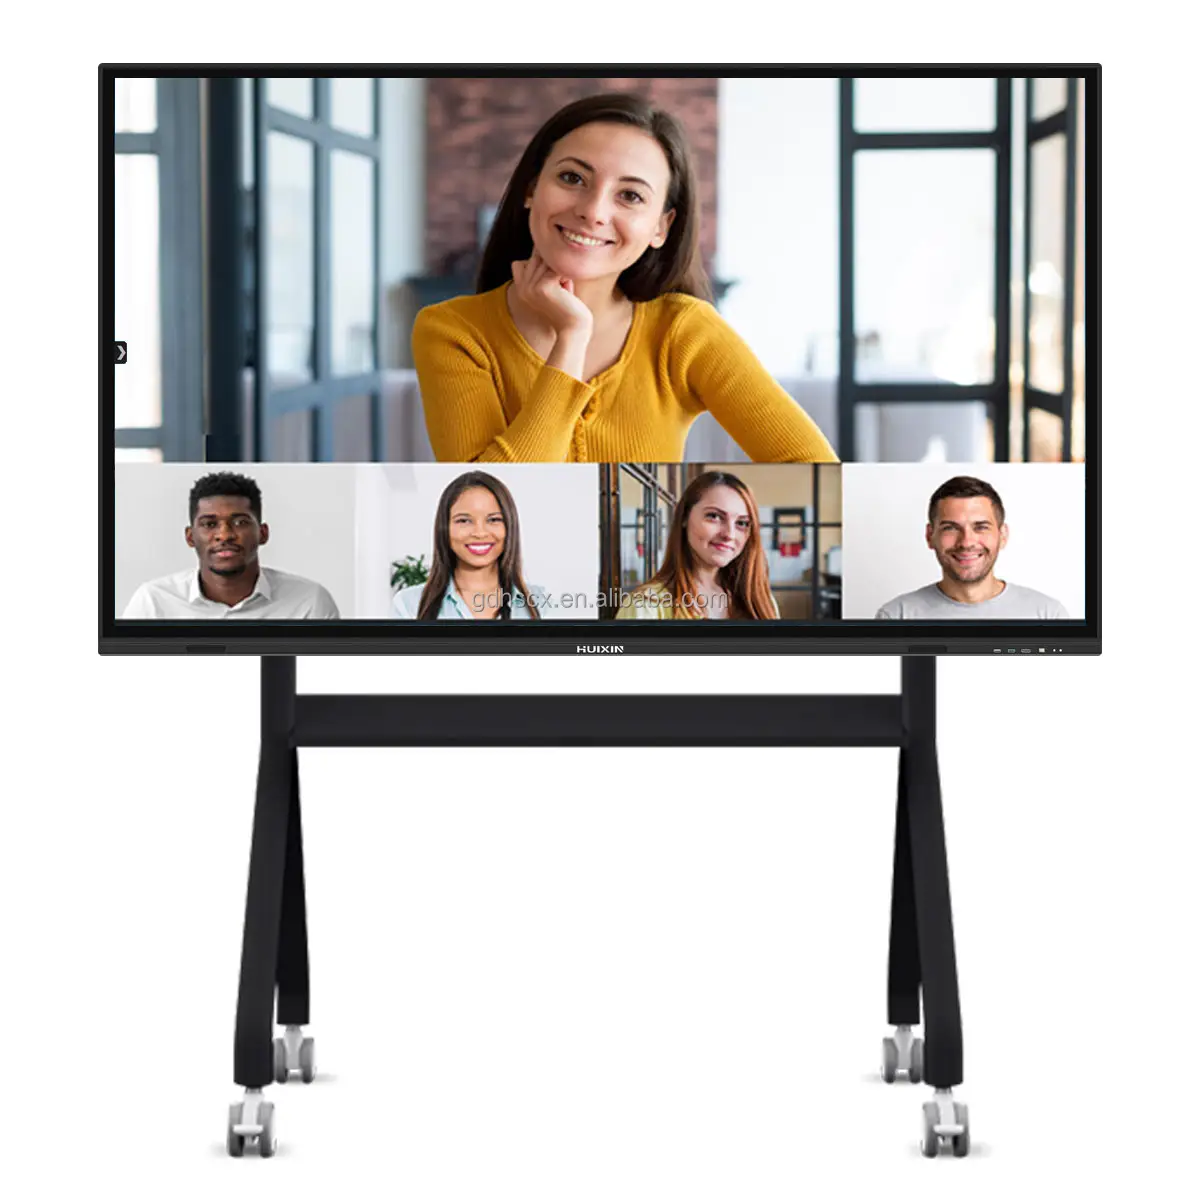 Customizable 75 Inch Interactive Smart Board LCD Conference All-in-One Whiteboard TV with Infrared Capacitive Touch Screen